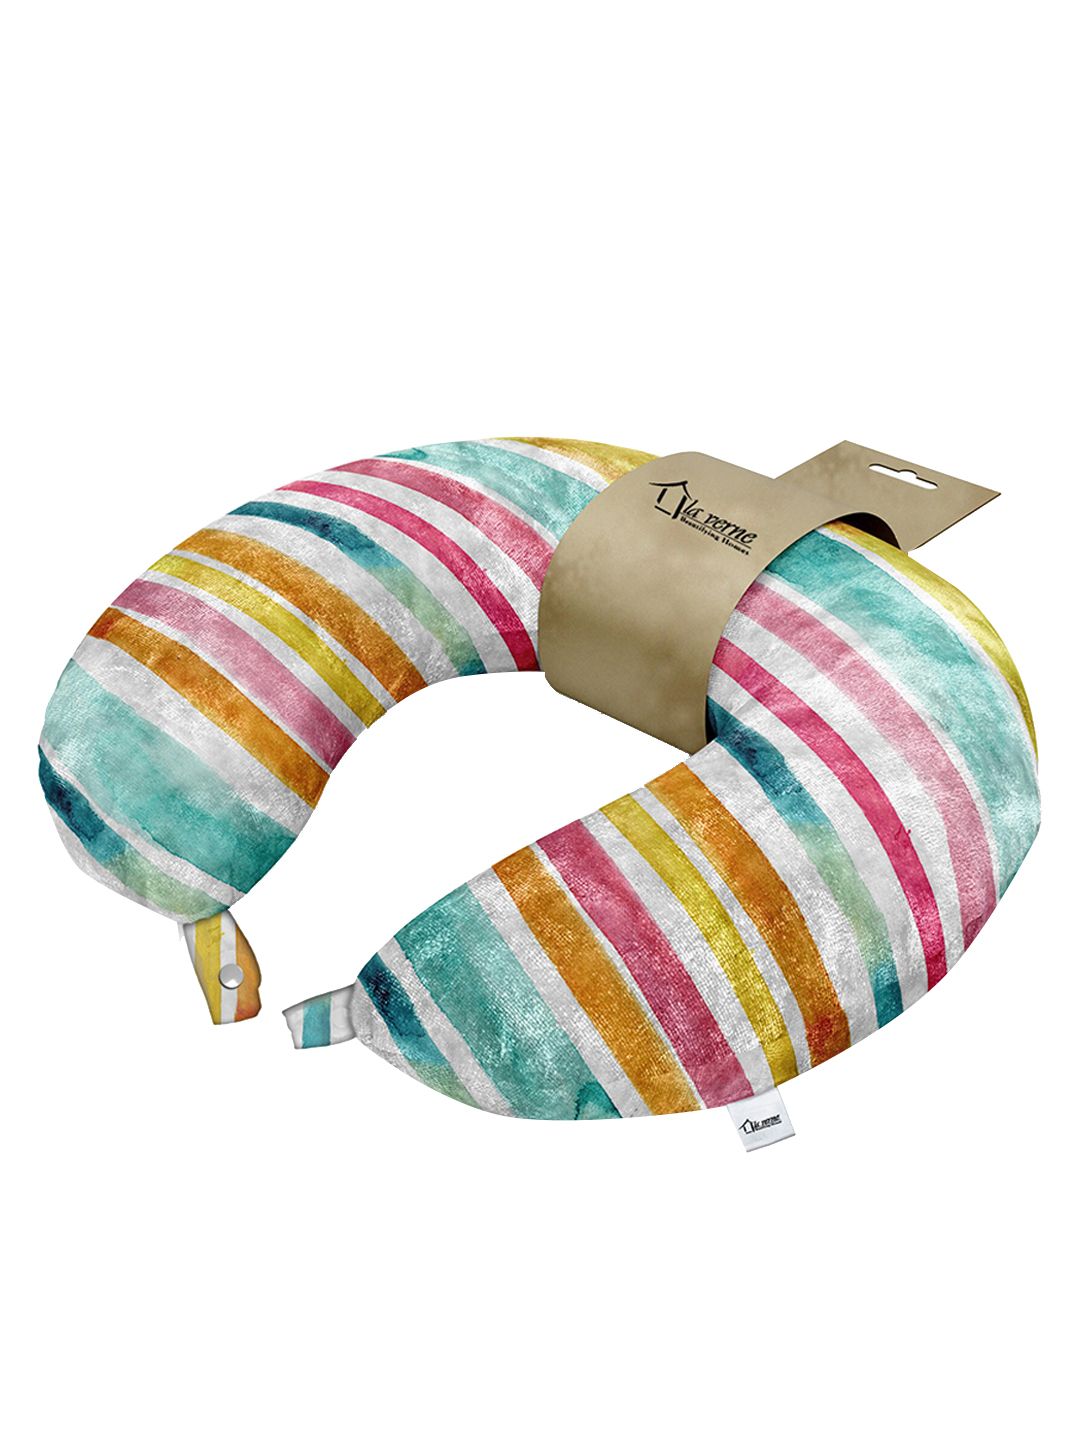 LA VERNE Assorted Printed Travel Neck Pillow Price in India